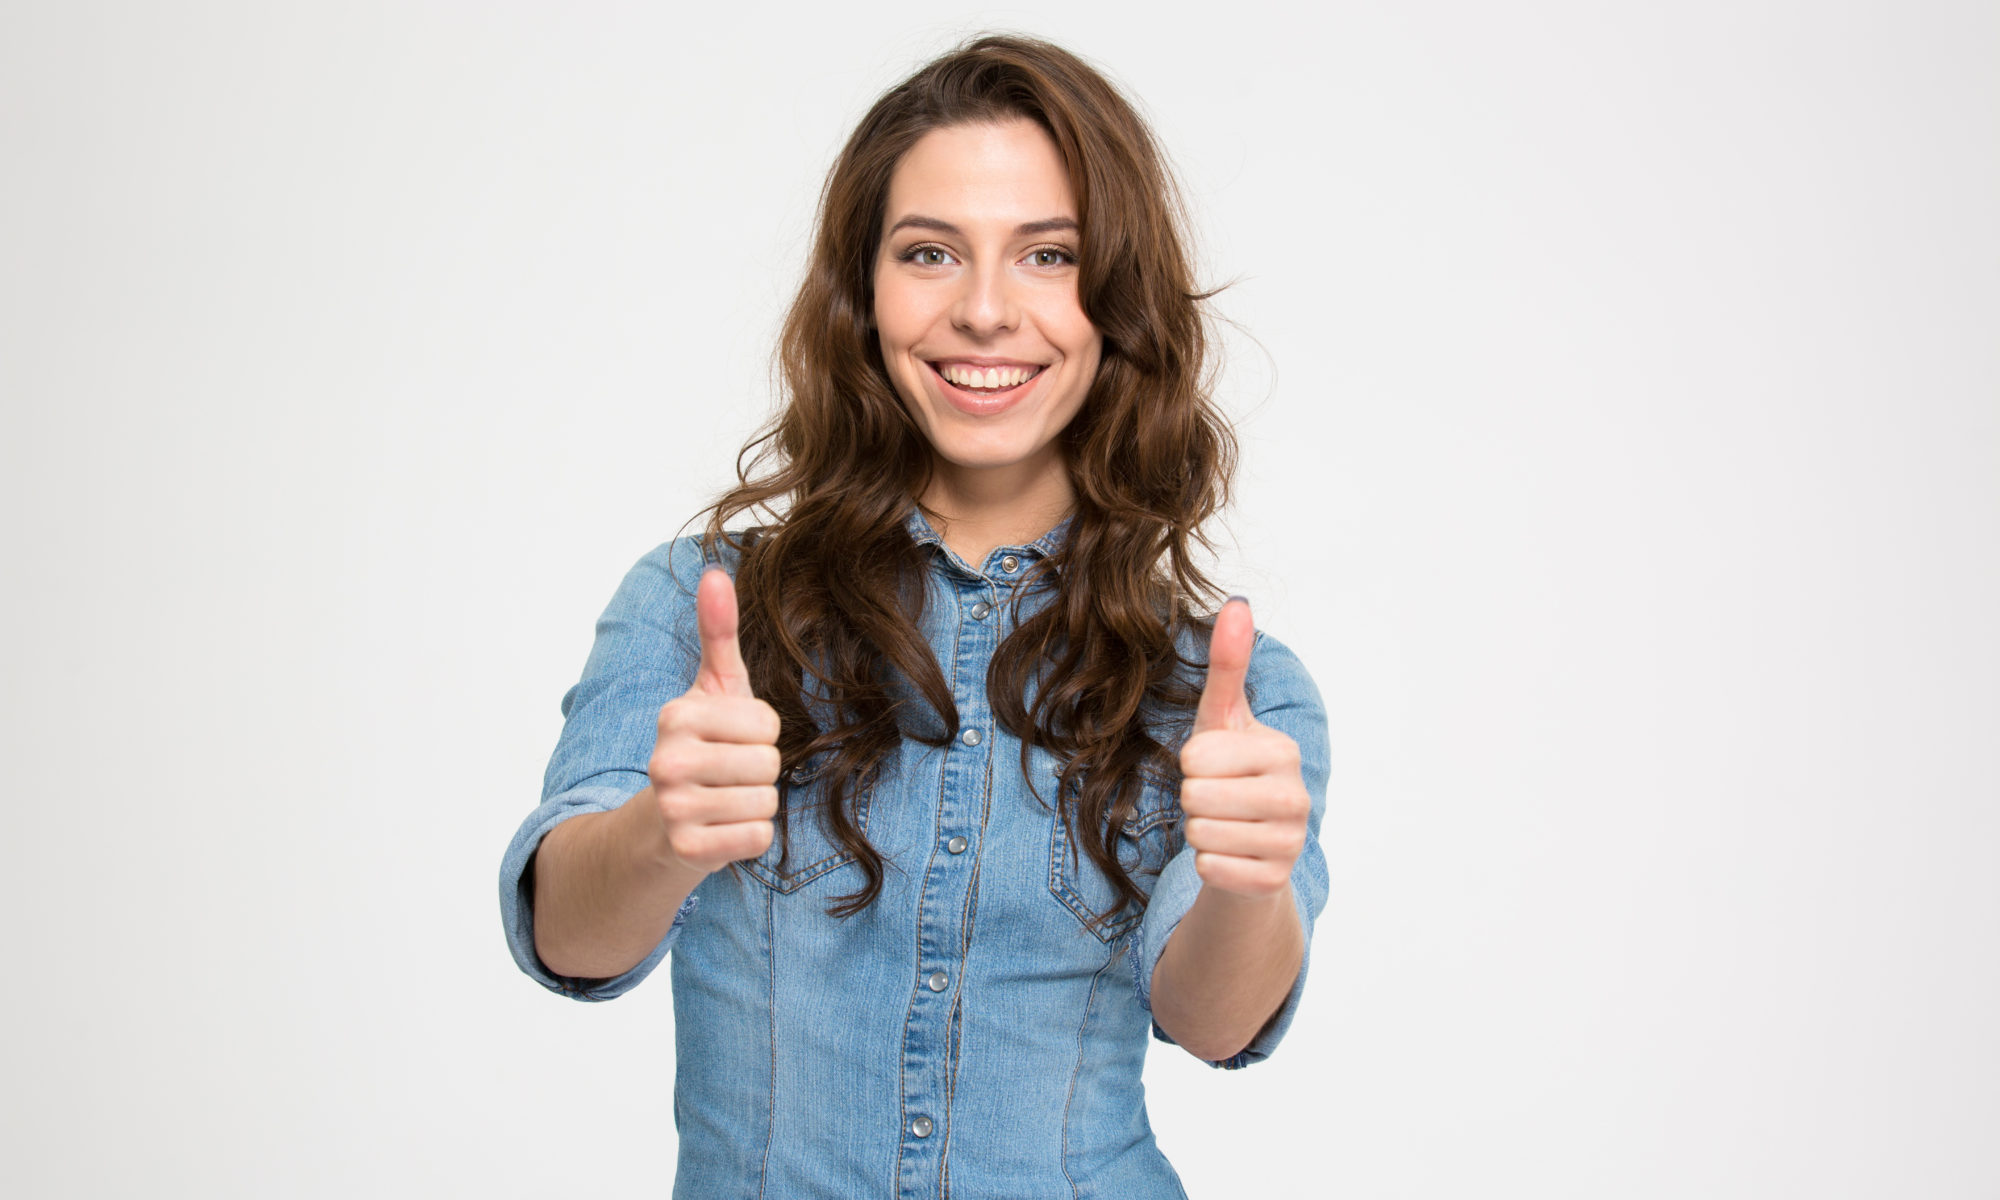 excited woman with two thumbs up